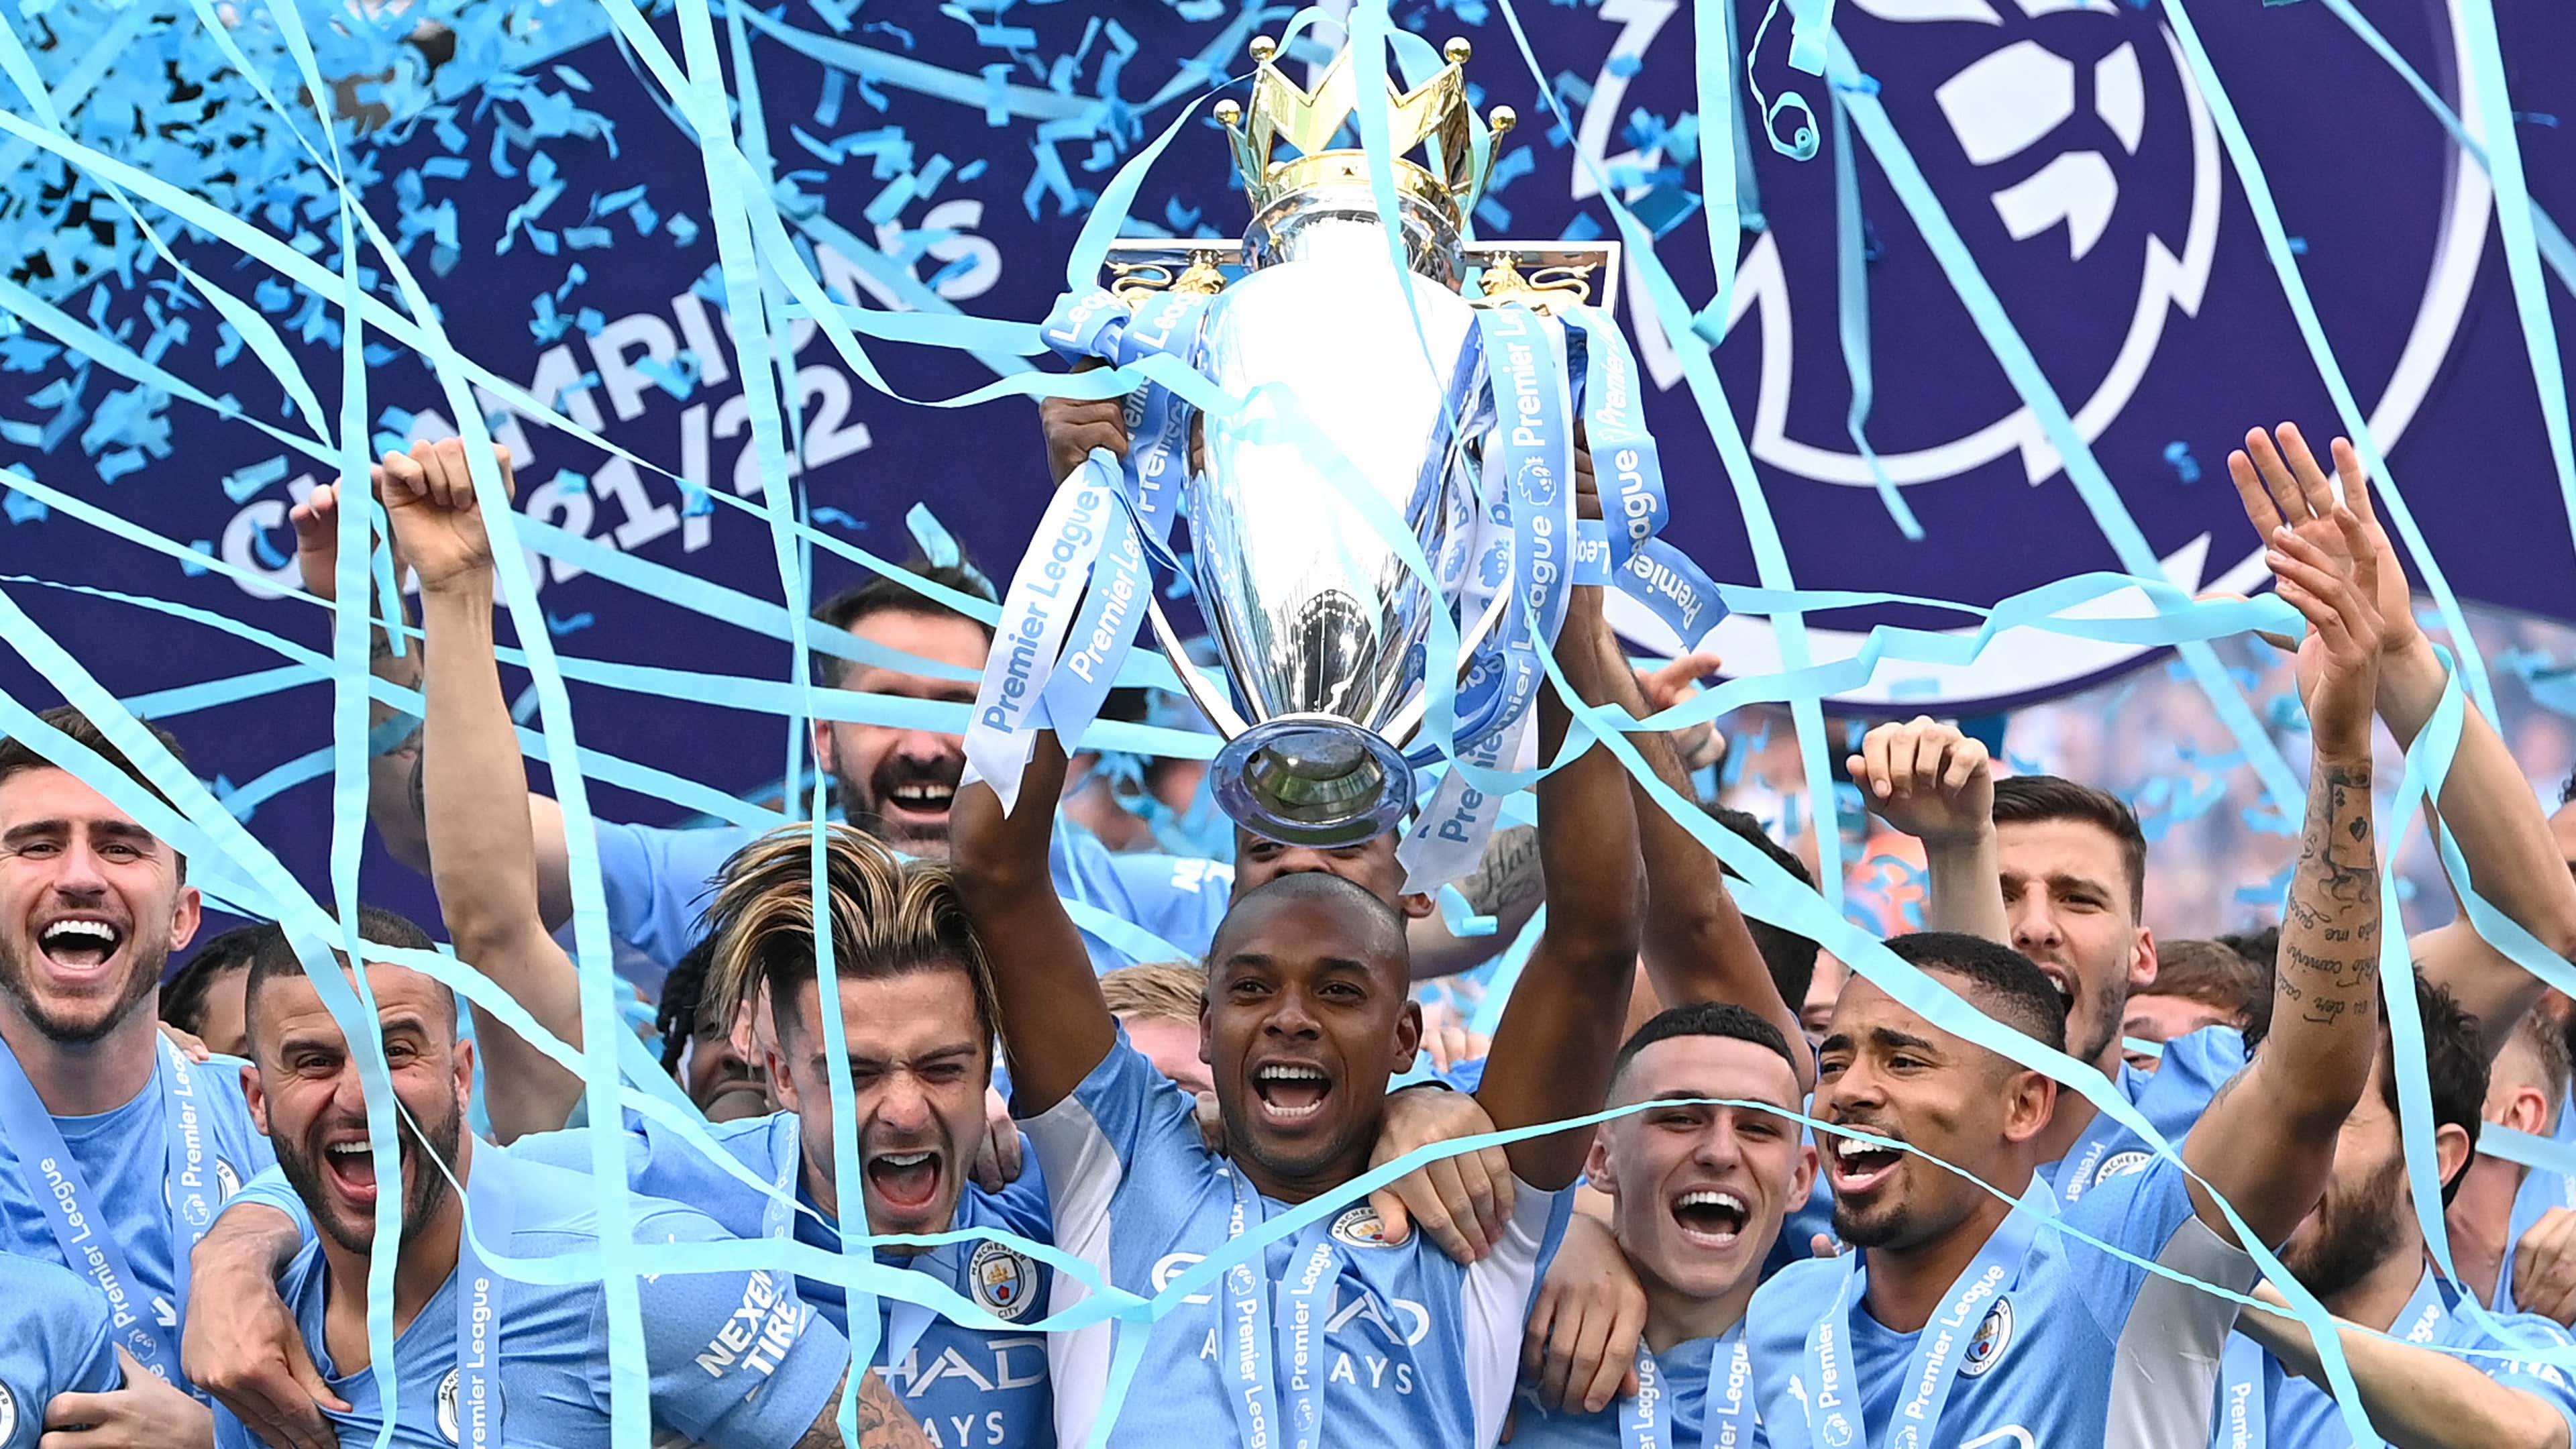 Man City Rallies to Win Premier League, Edging Liverpool by a